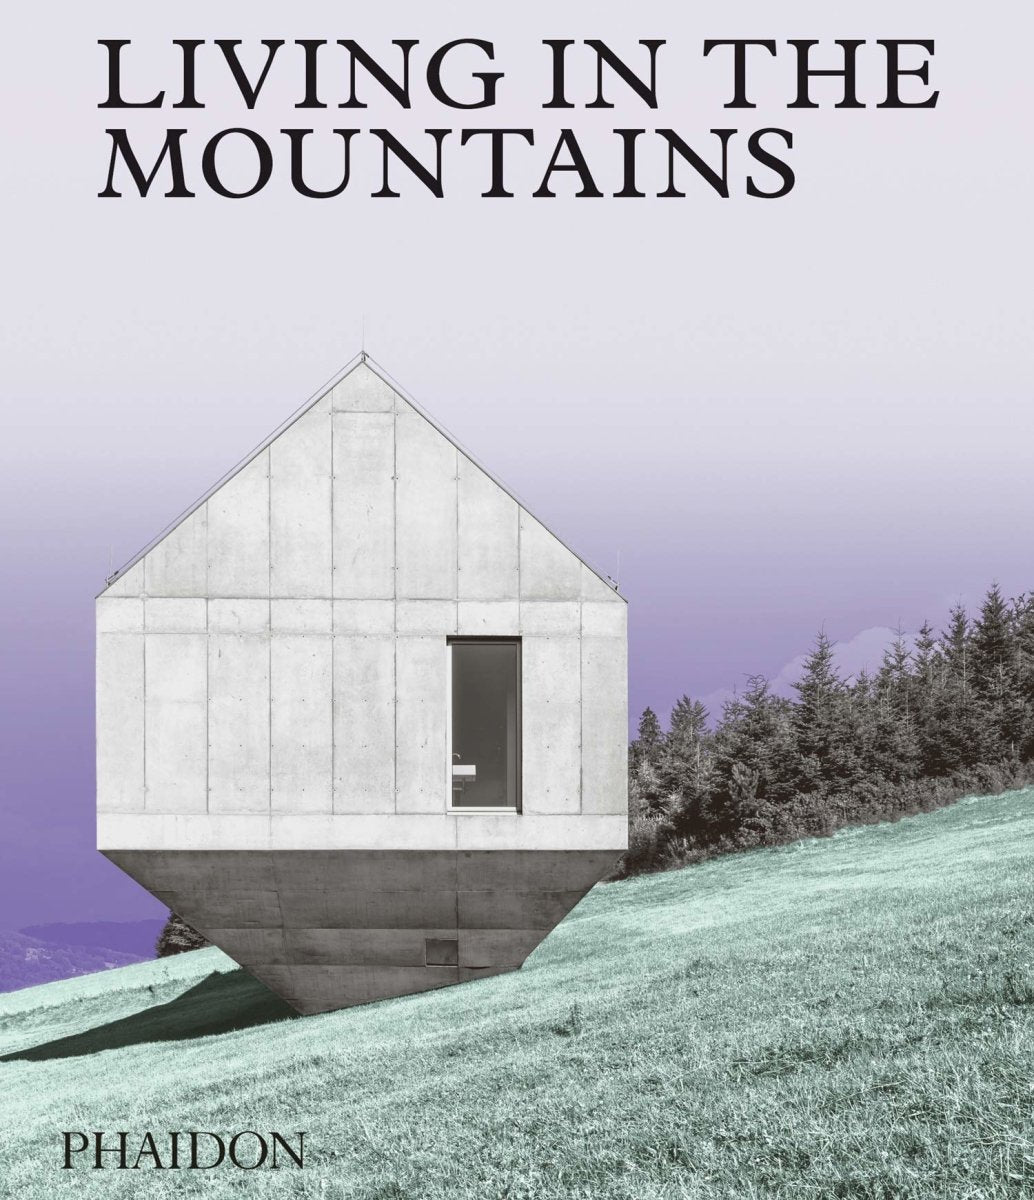 Living in the Mountains by Phaidon Editors - anatomē